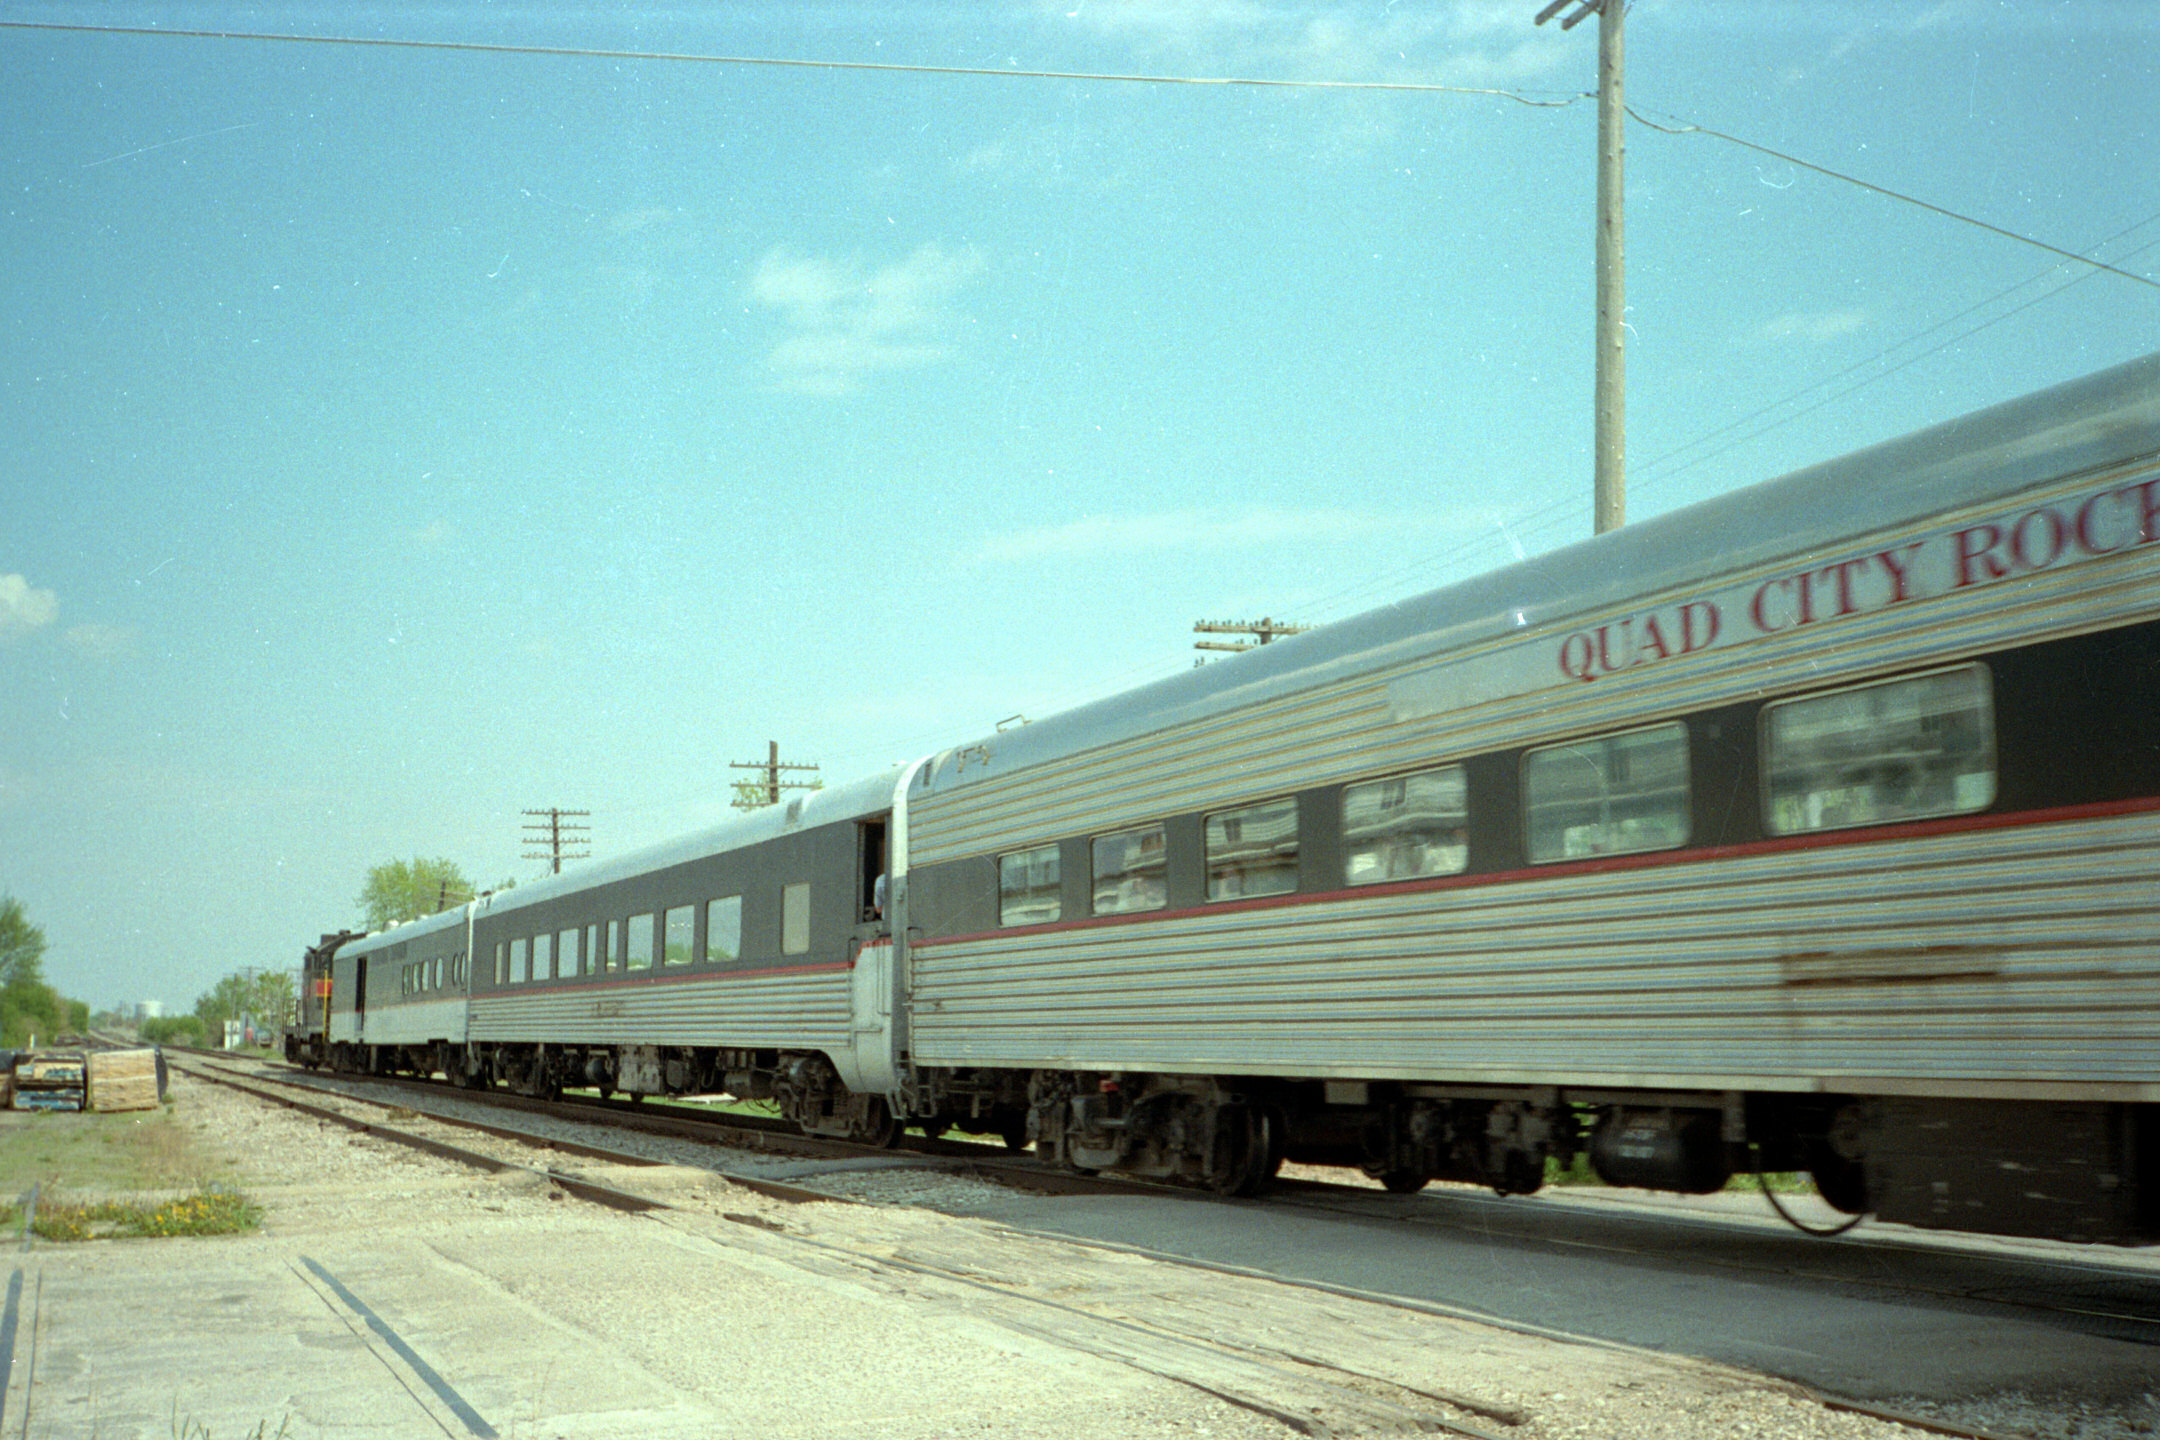 One of the Sunday runs eastbound at Walcott, IA, with 468 on the front